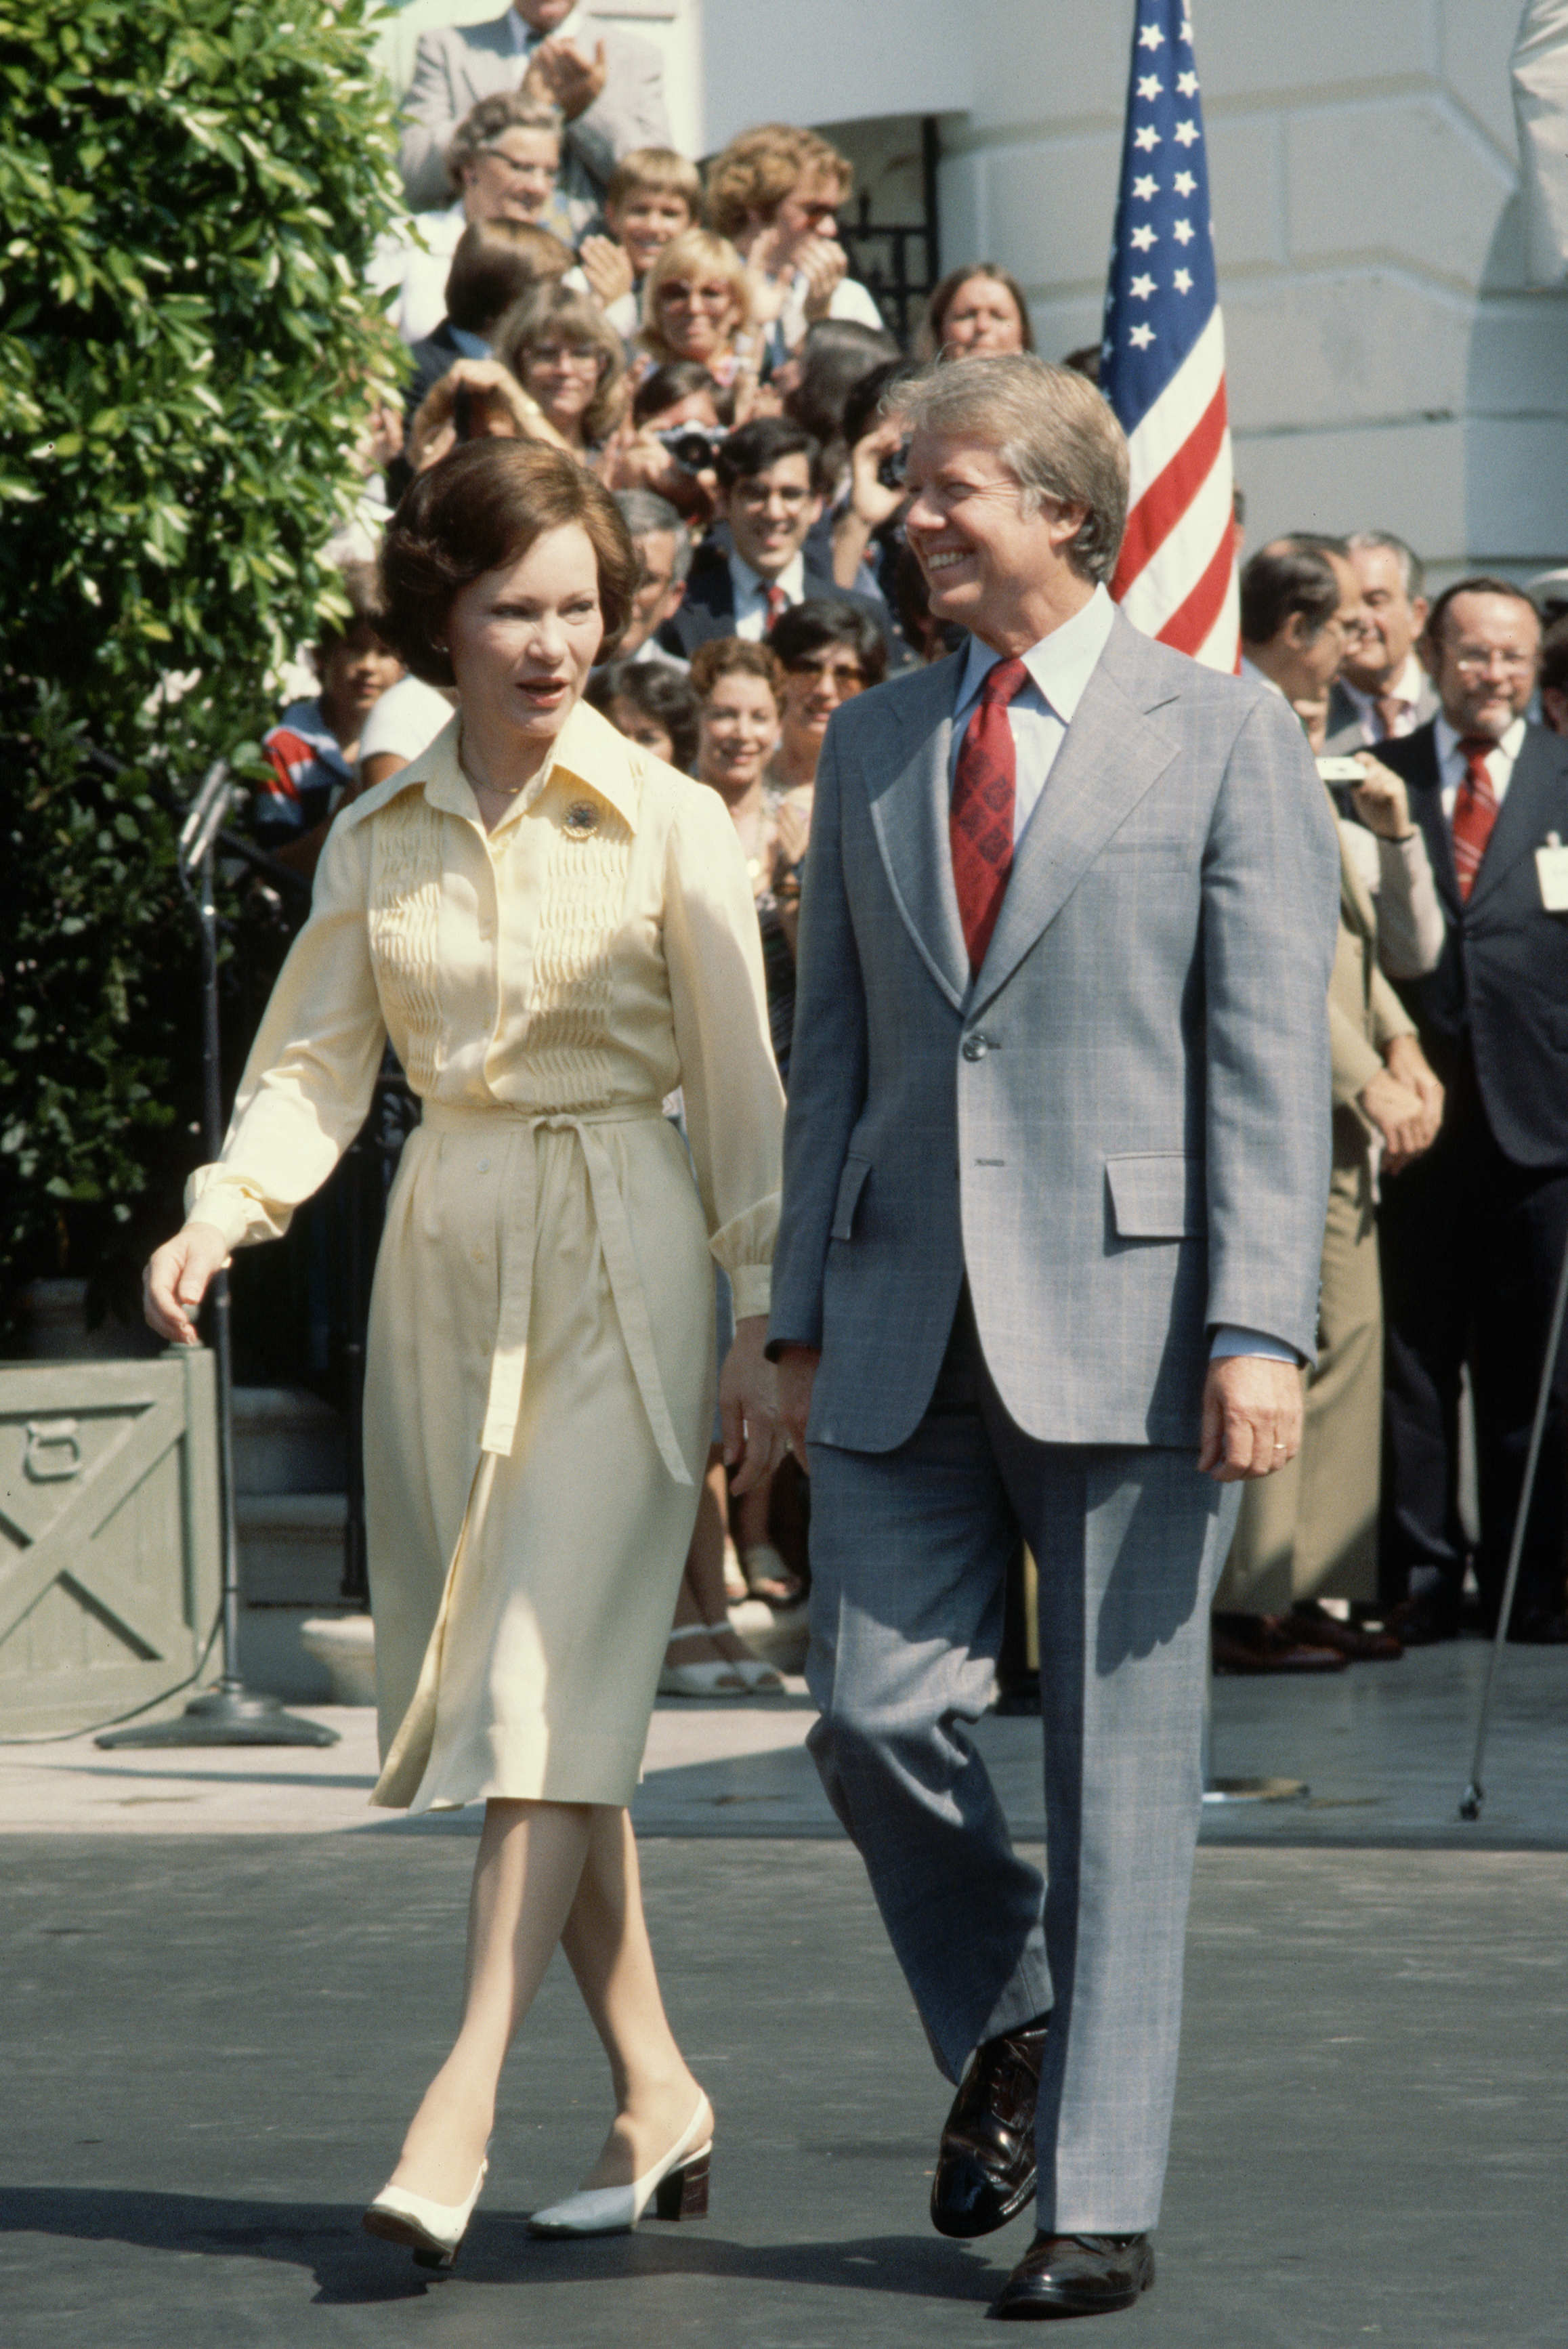 Rosalynn and Jimmy Carter take a walk down, observed by a crowd of spectators, on the South Lawn drive at the White House on July 19, 1977. | Source: Getty Images